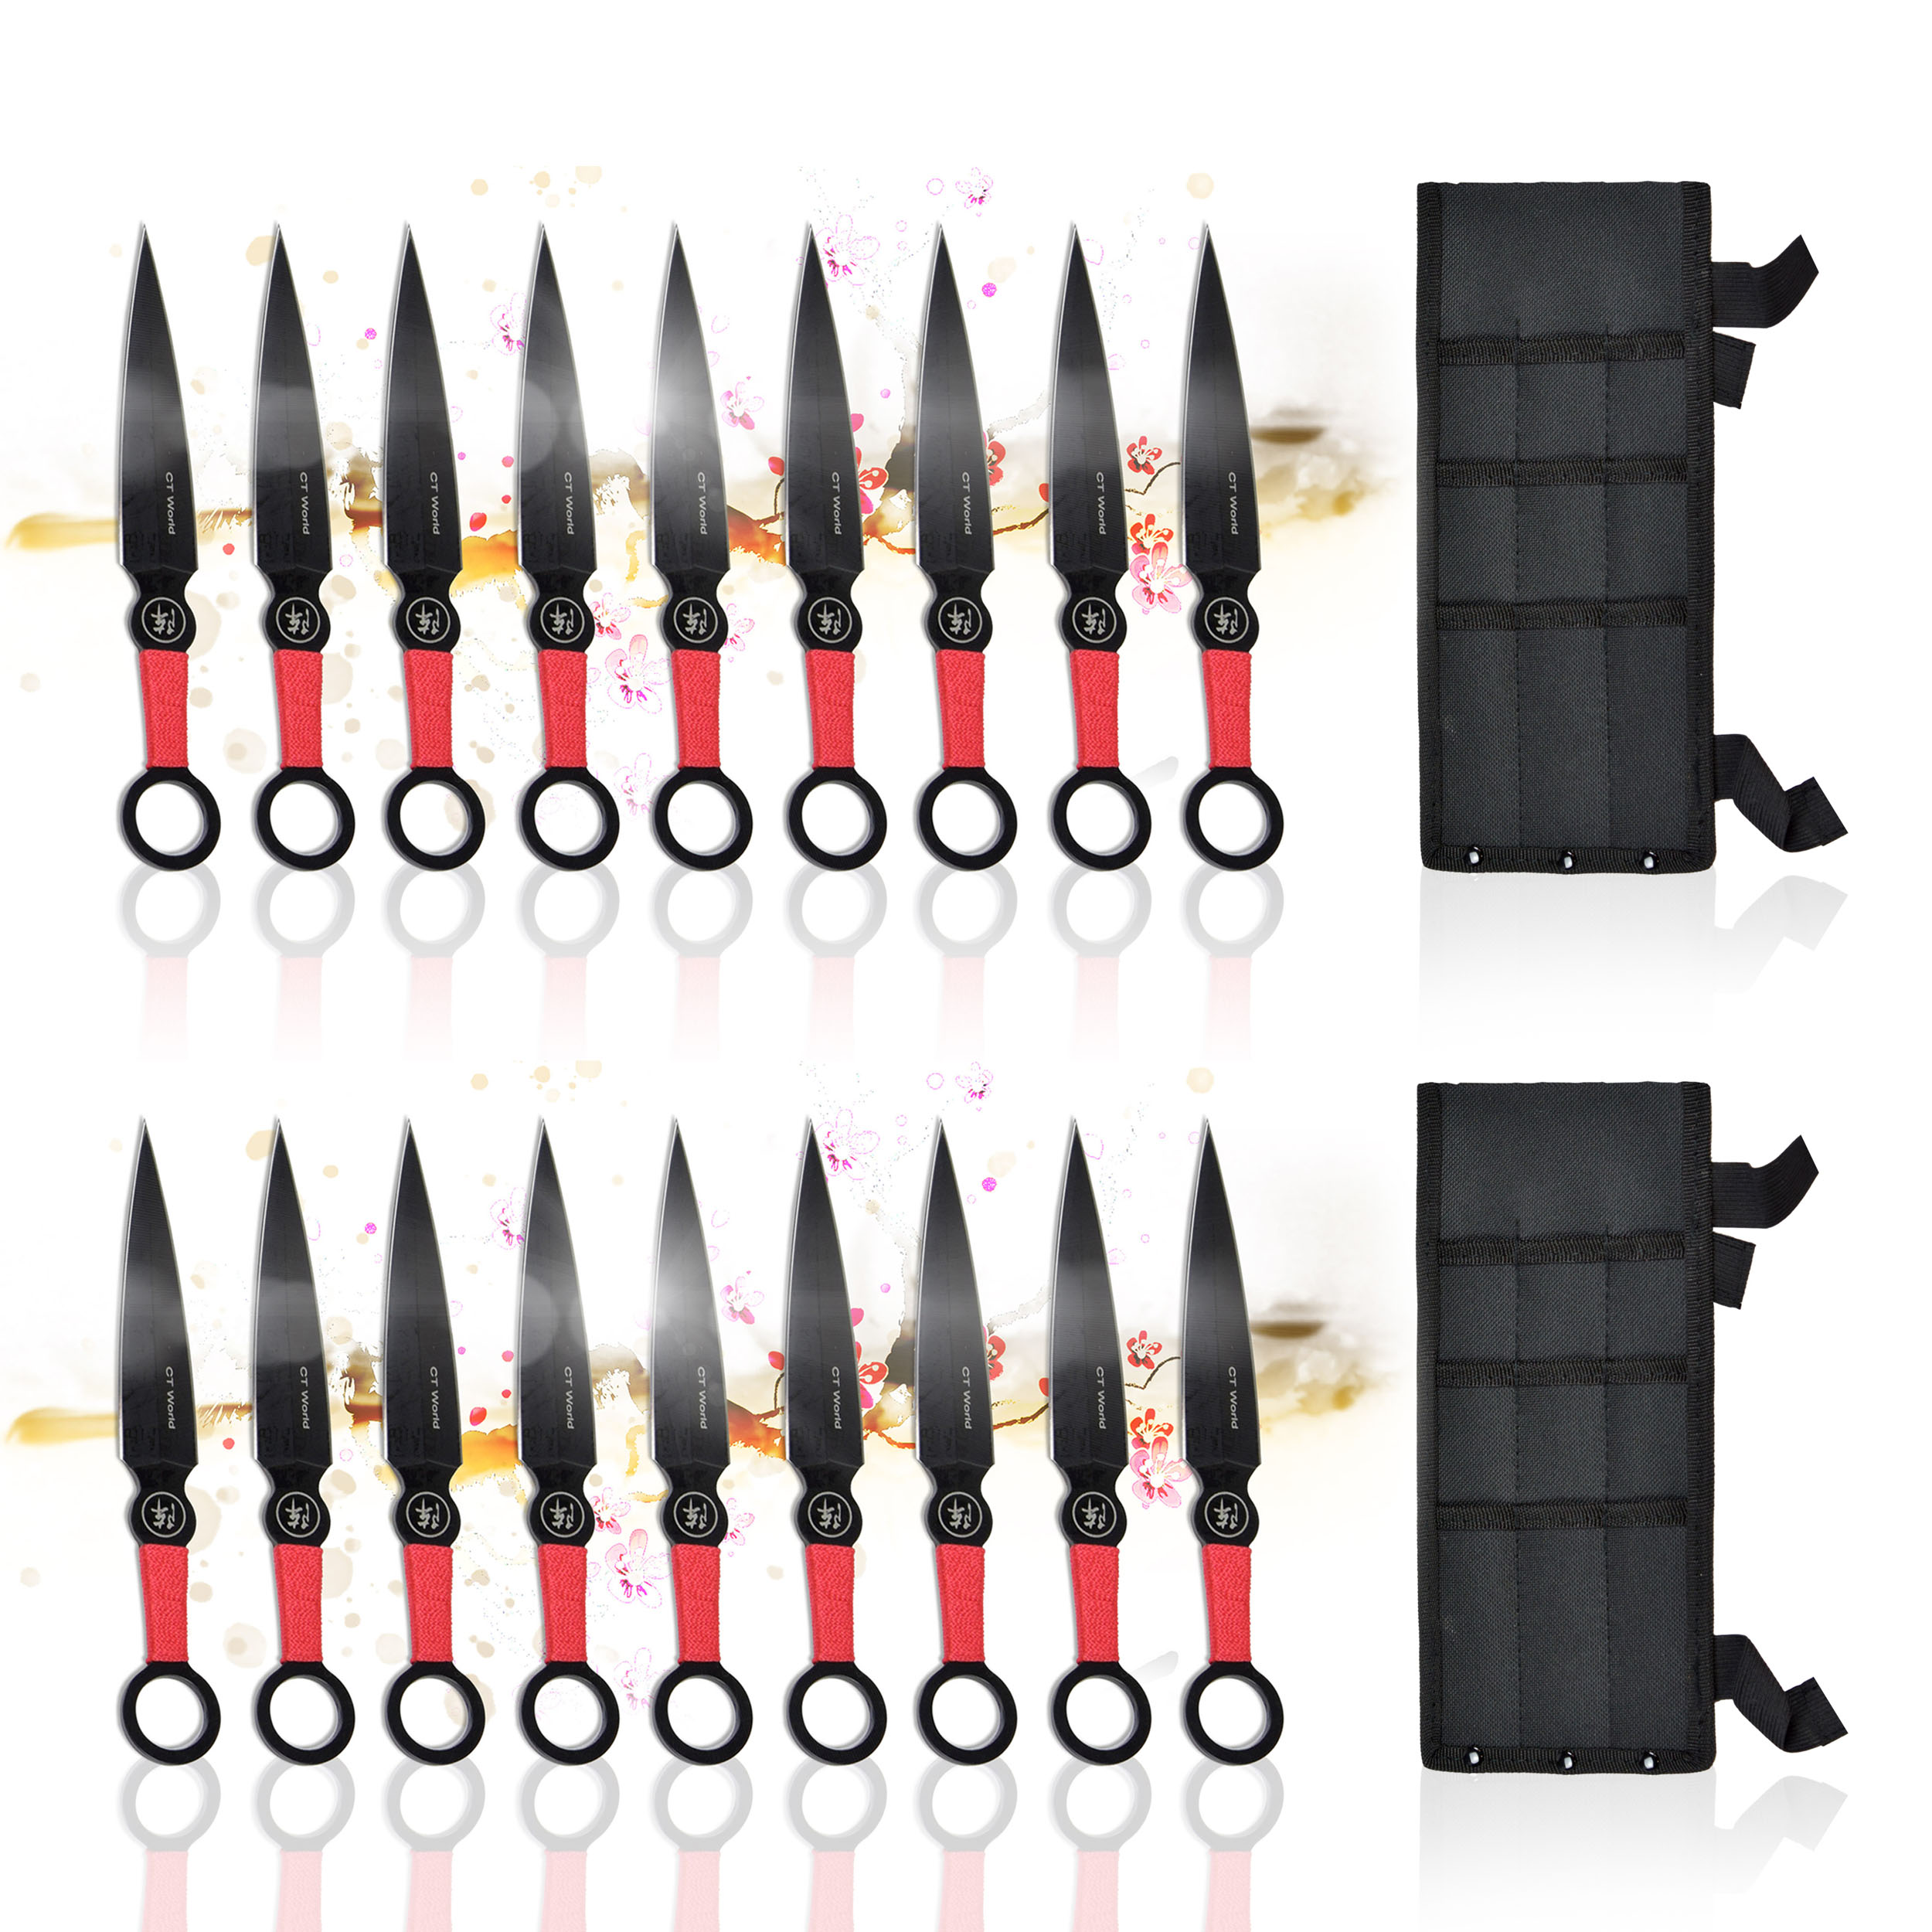 Throwing knife set of 18 with sheath, stainless steel kunai 